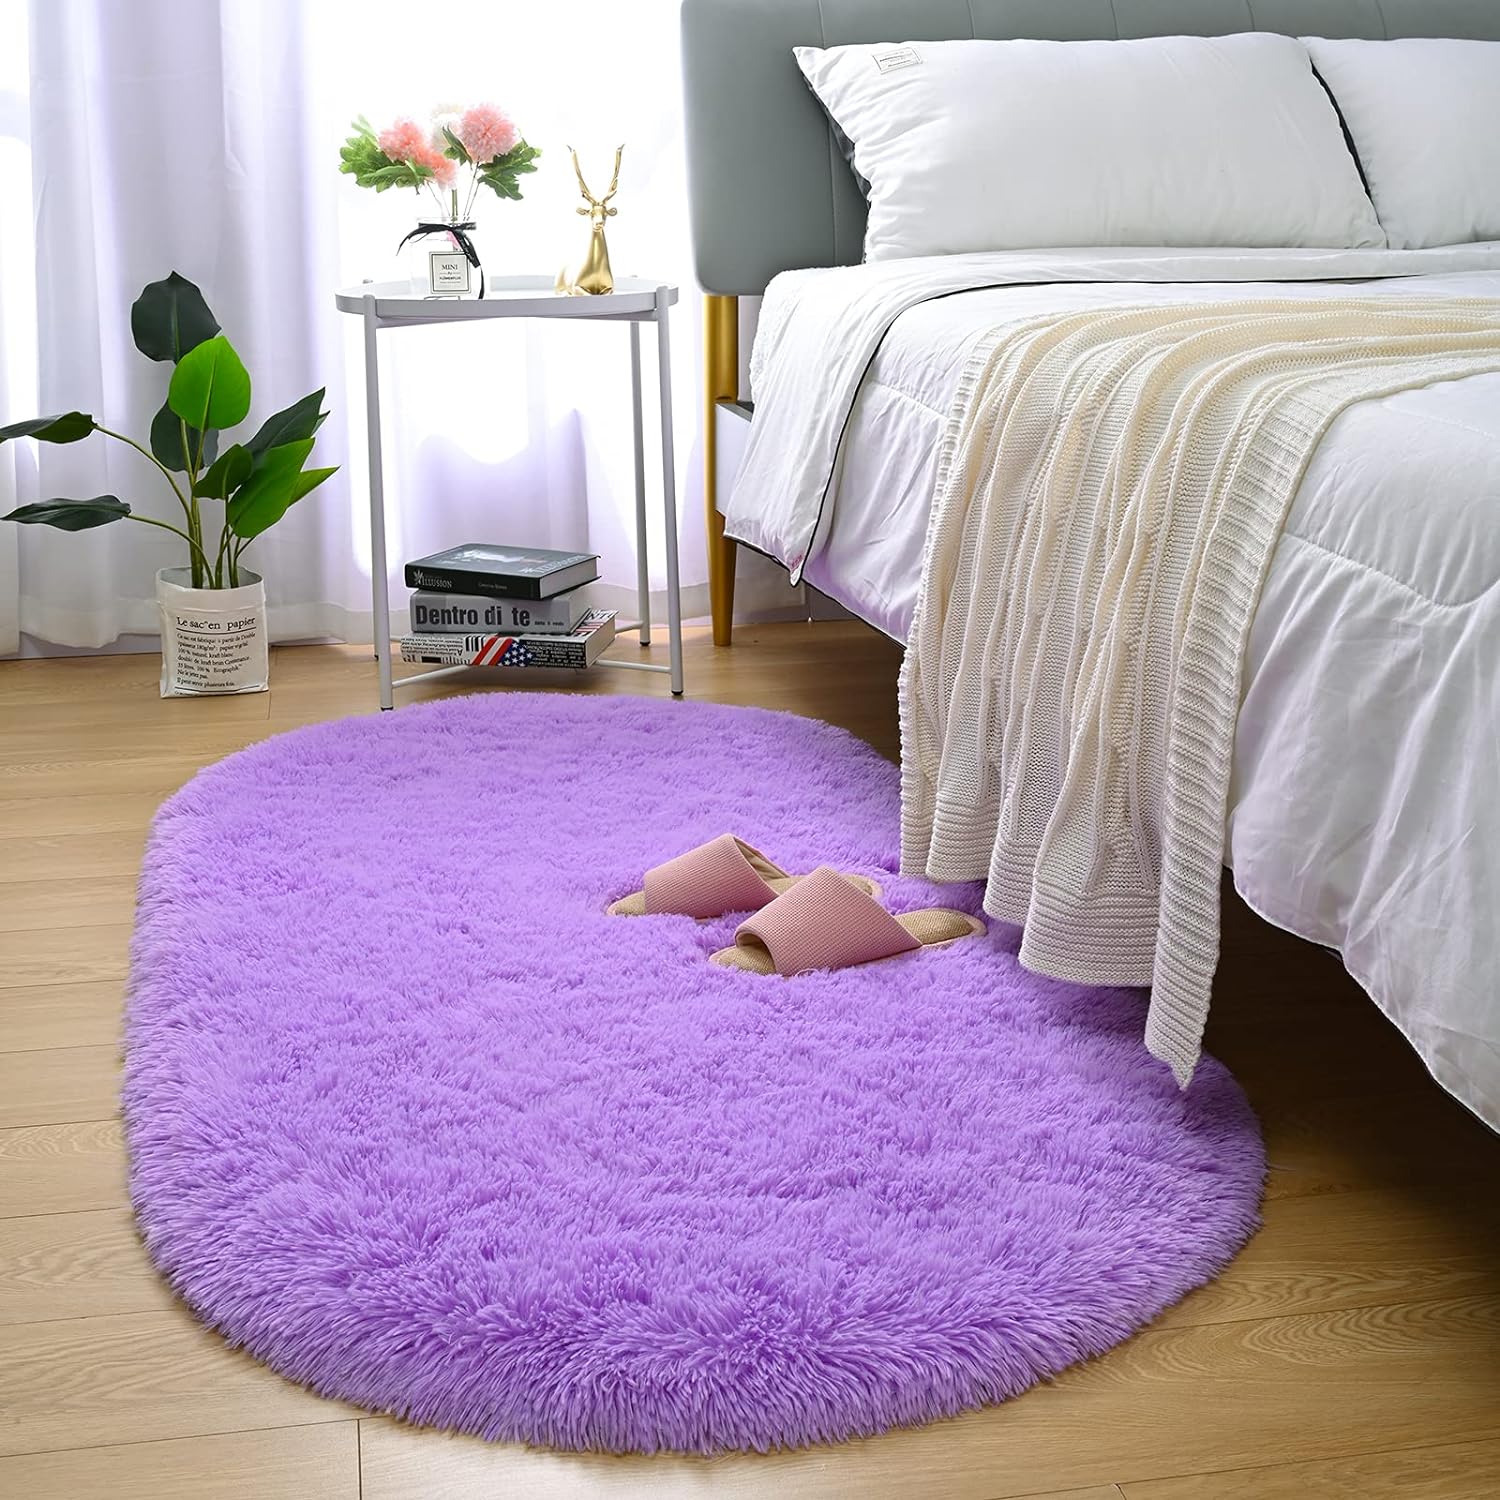 Merelax Soft Shaggy Rug for Kids Bedroom, Oval 2.6'x5.3' Purple Plush Fluffy Carpets for Living Room, Furry Carpet for Teen Girls Room, Anti-Skid Fuzzy Comfy Rug for Nursery Decor Cute Baby Play Mat